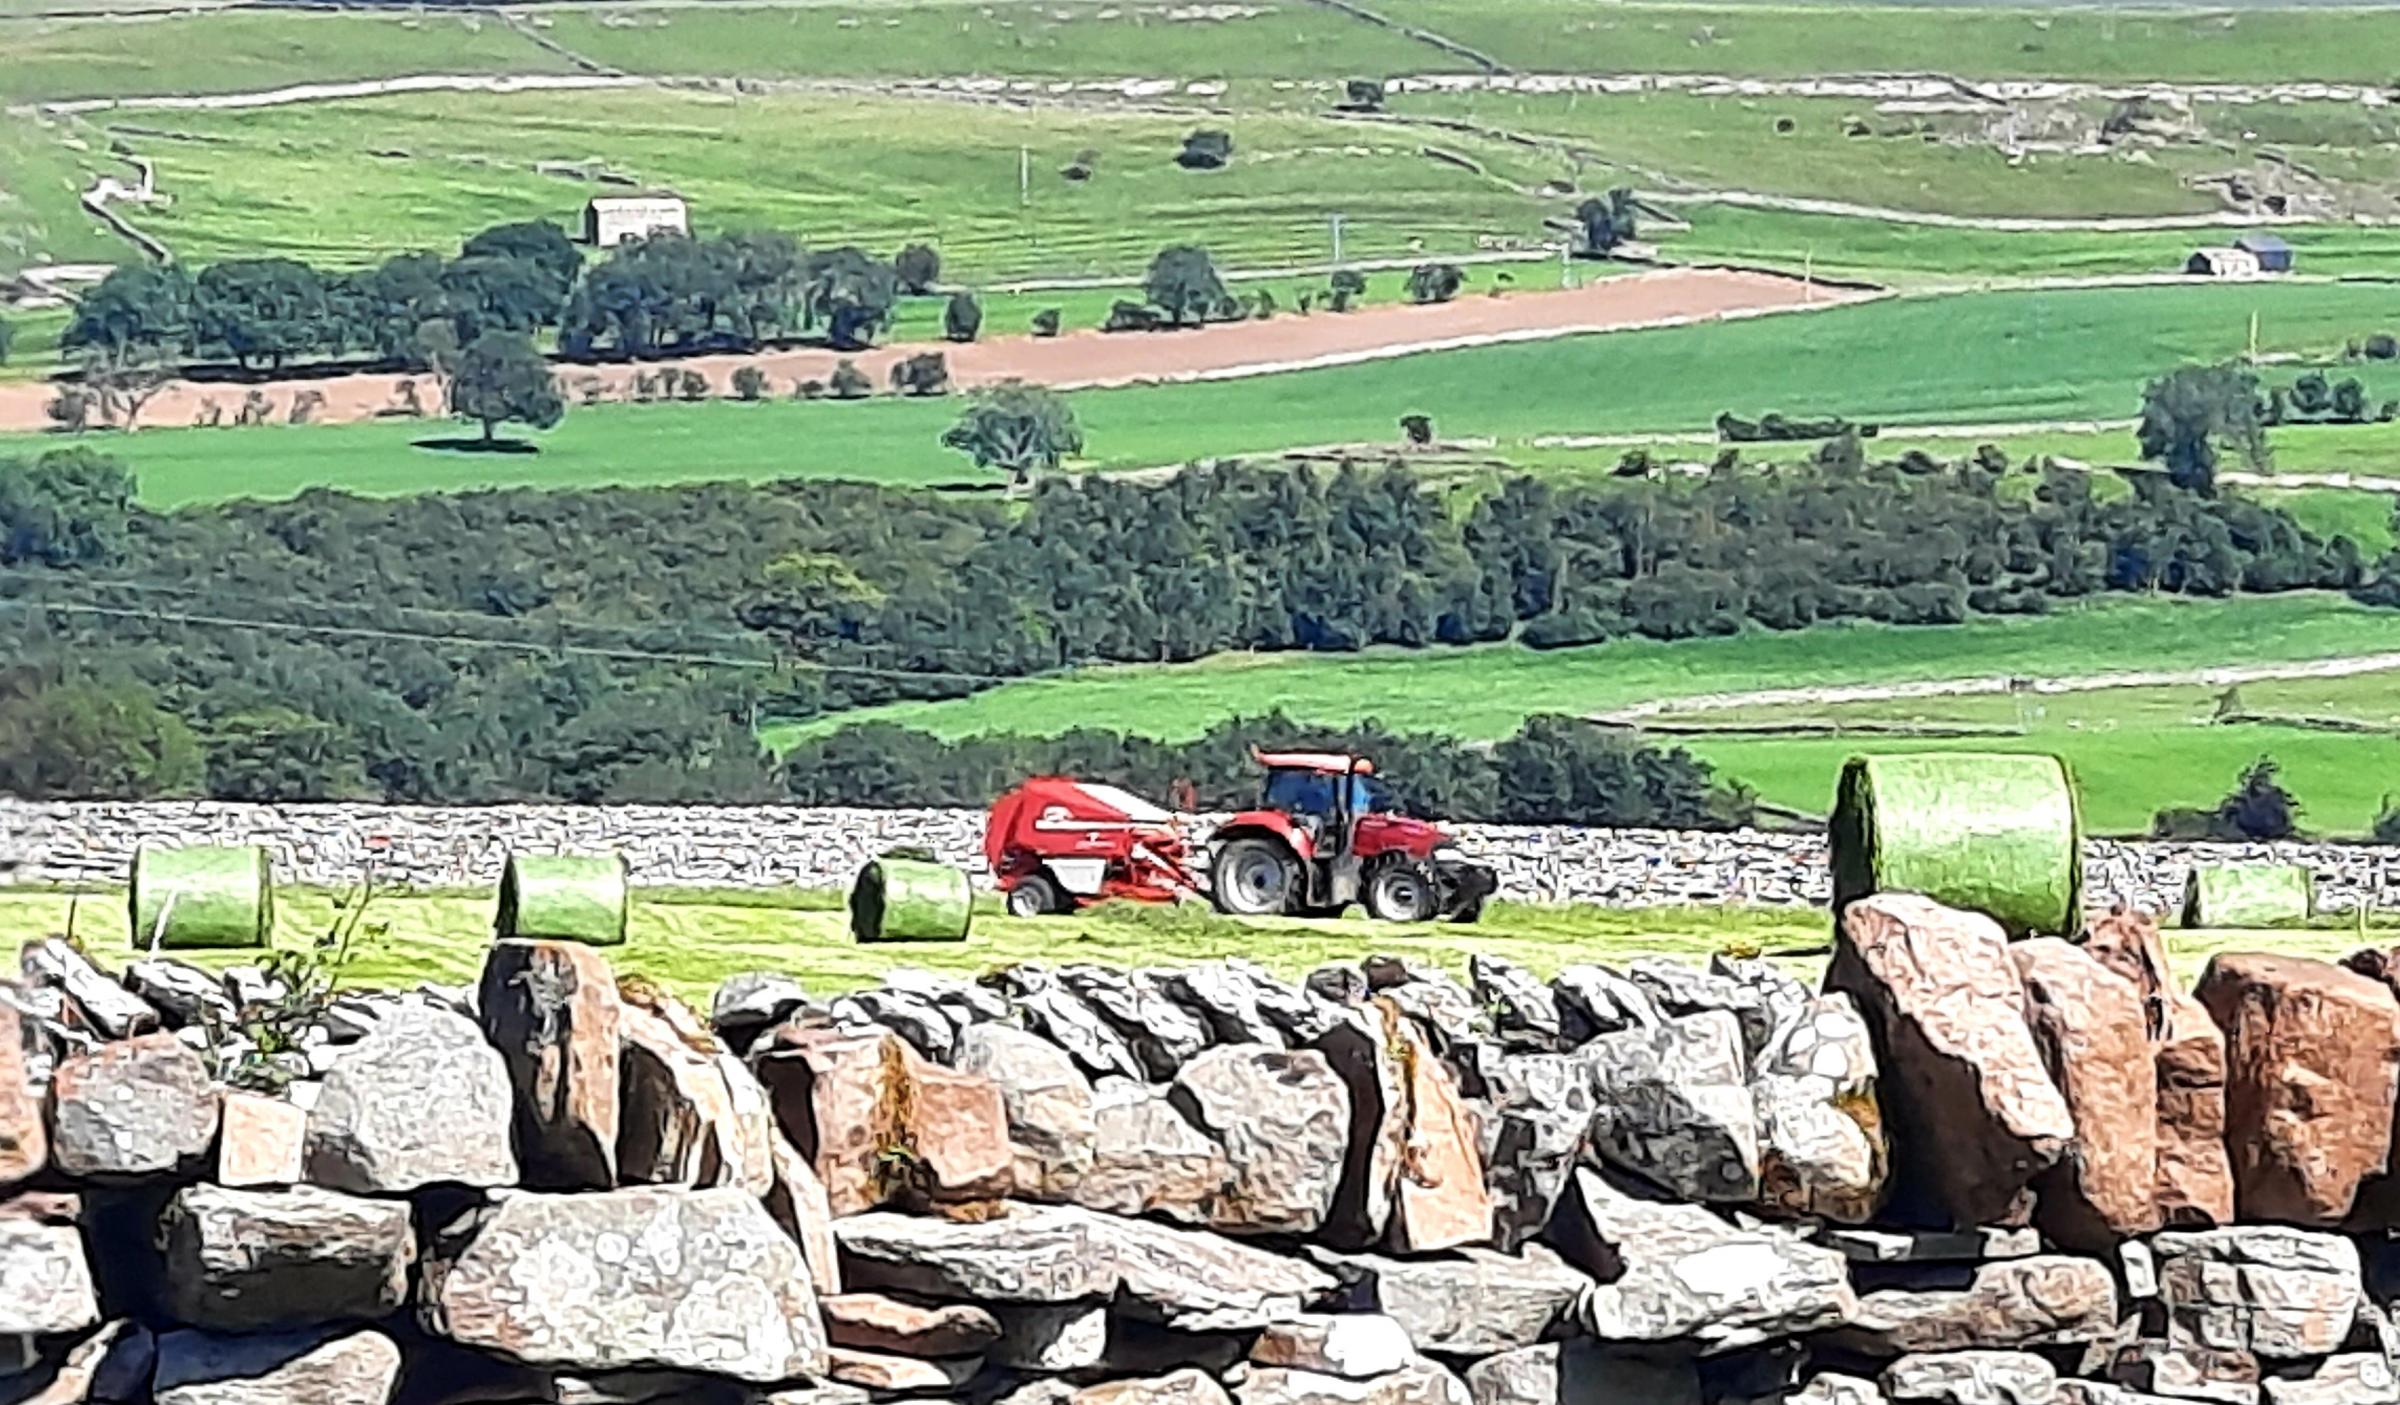 The Peoples Champion, nine-year-old Joseph Booth, was a clear winner with his photograph of a Tractor at Work that also won the Young Peoples section. 